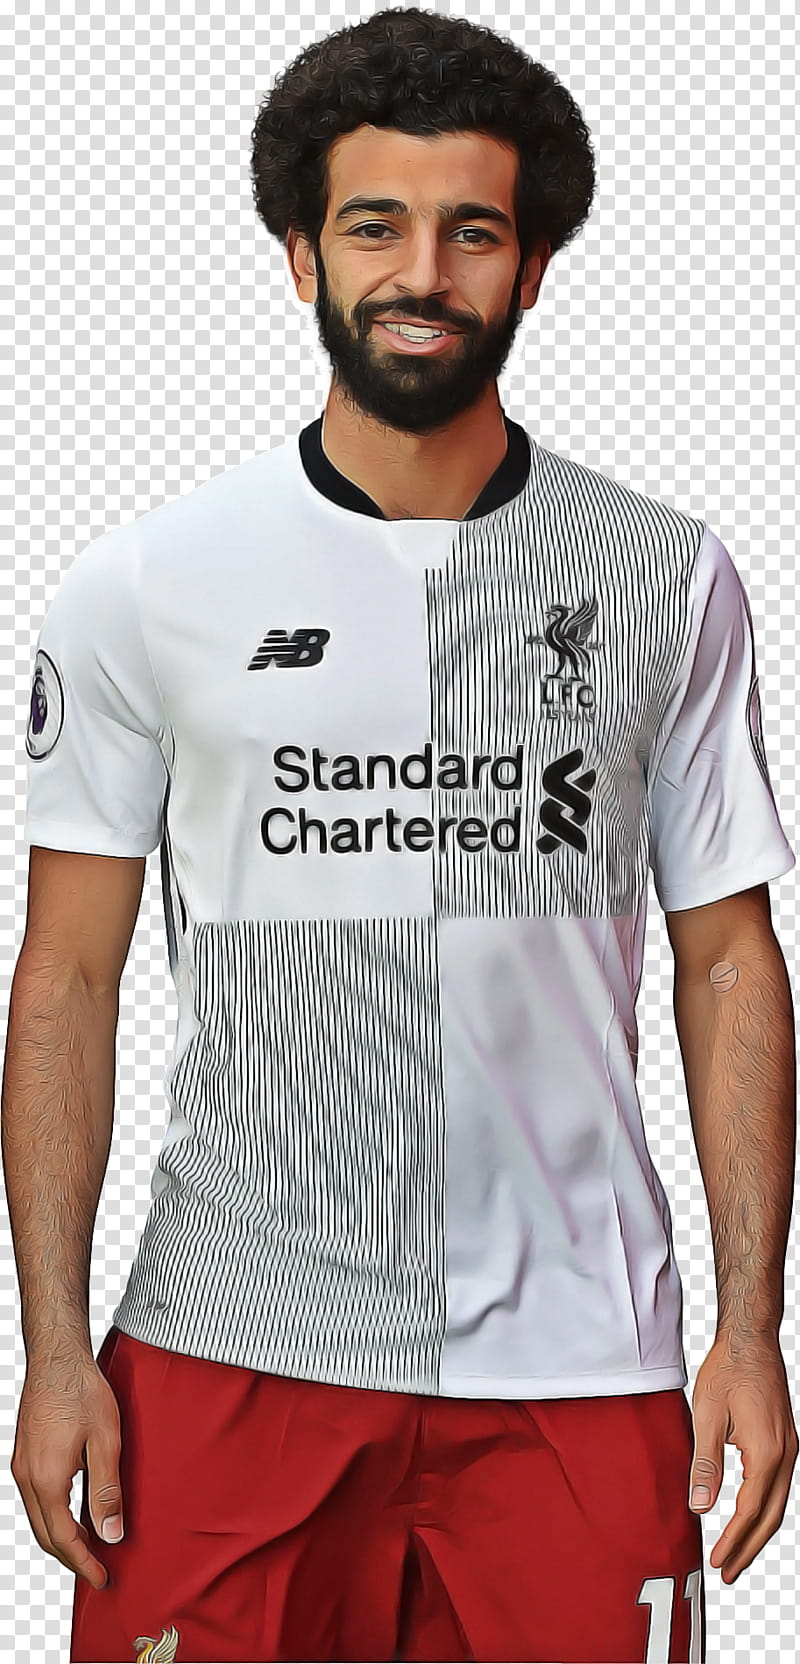 Mohamed Salah, Liverpool Fc, Premier League, Football, Egypt National Football Team, As Roma, Mohamed Aboutrika, Tshirt transparent background PNG clipart